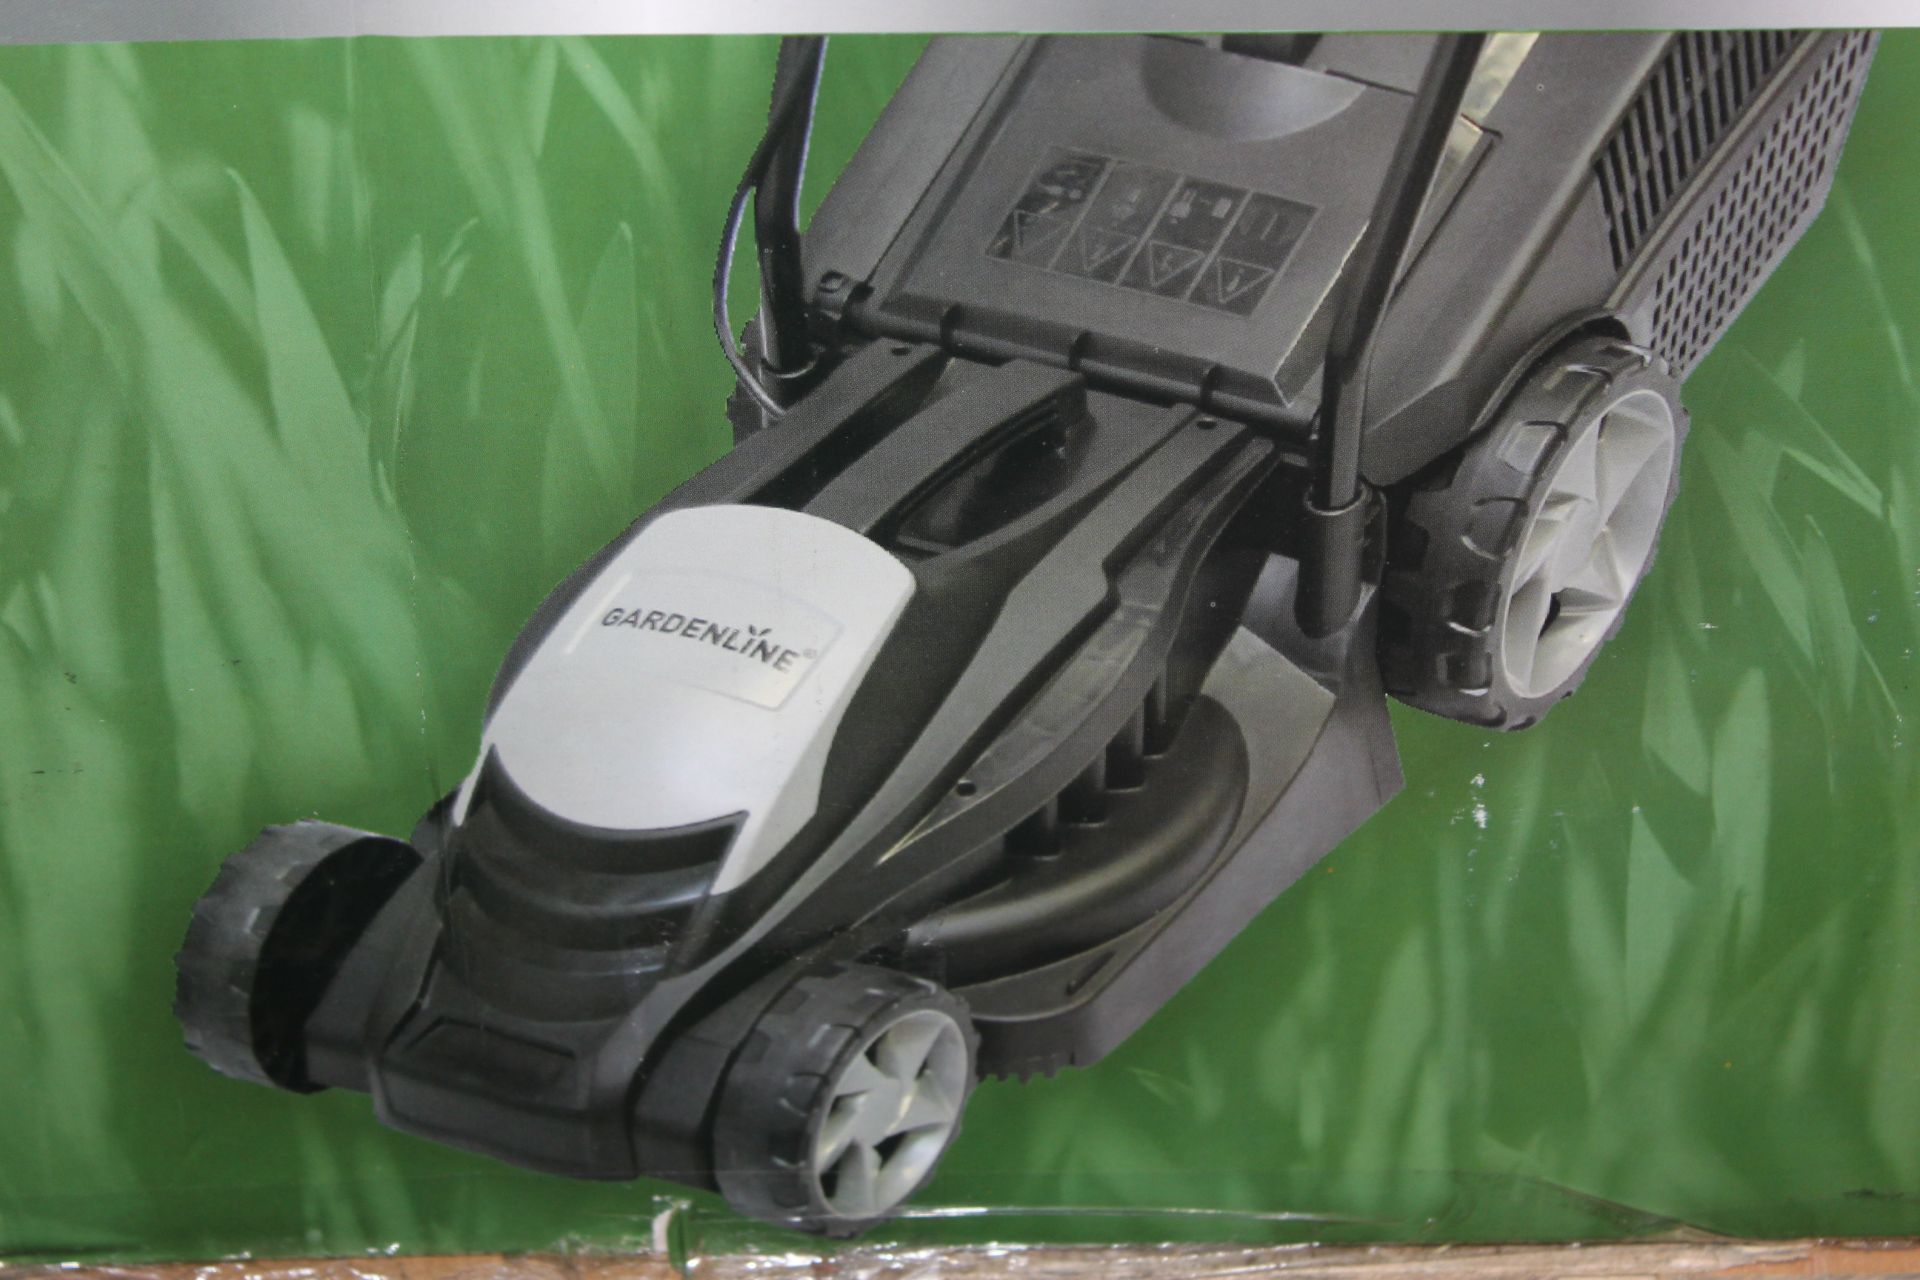 Boxed Gardenline Electric Lawn Mowers RRP £35 Each (Public Viewing and Appraisals Available)